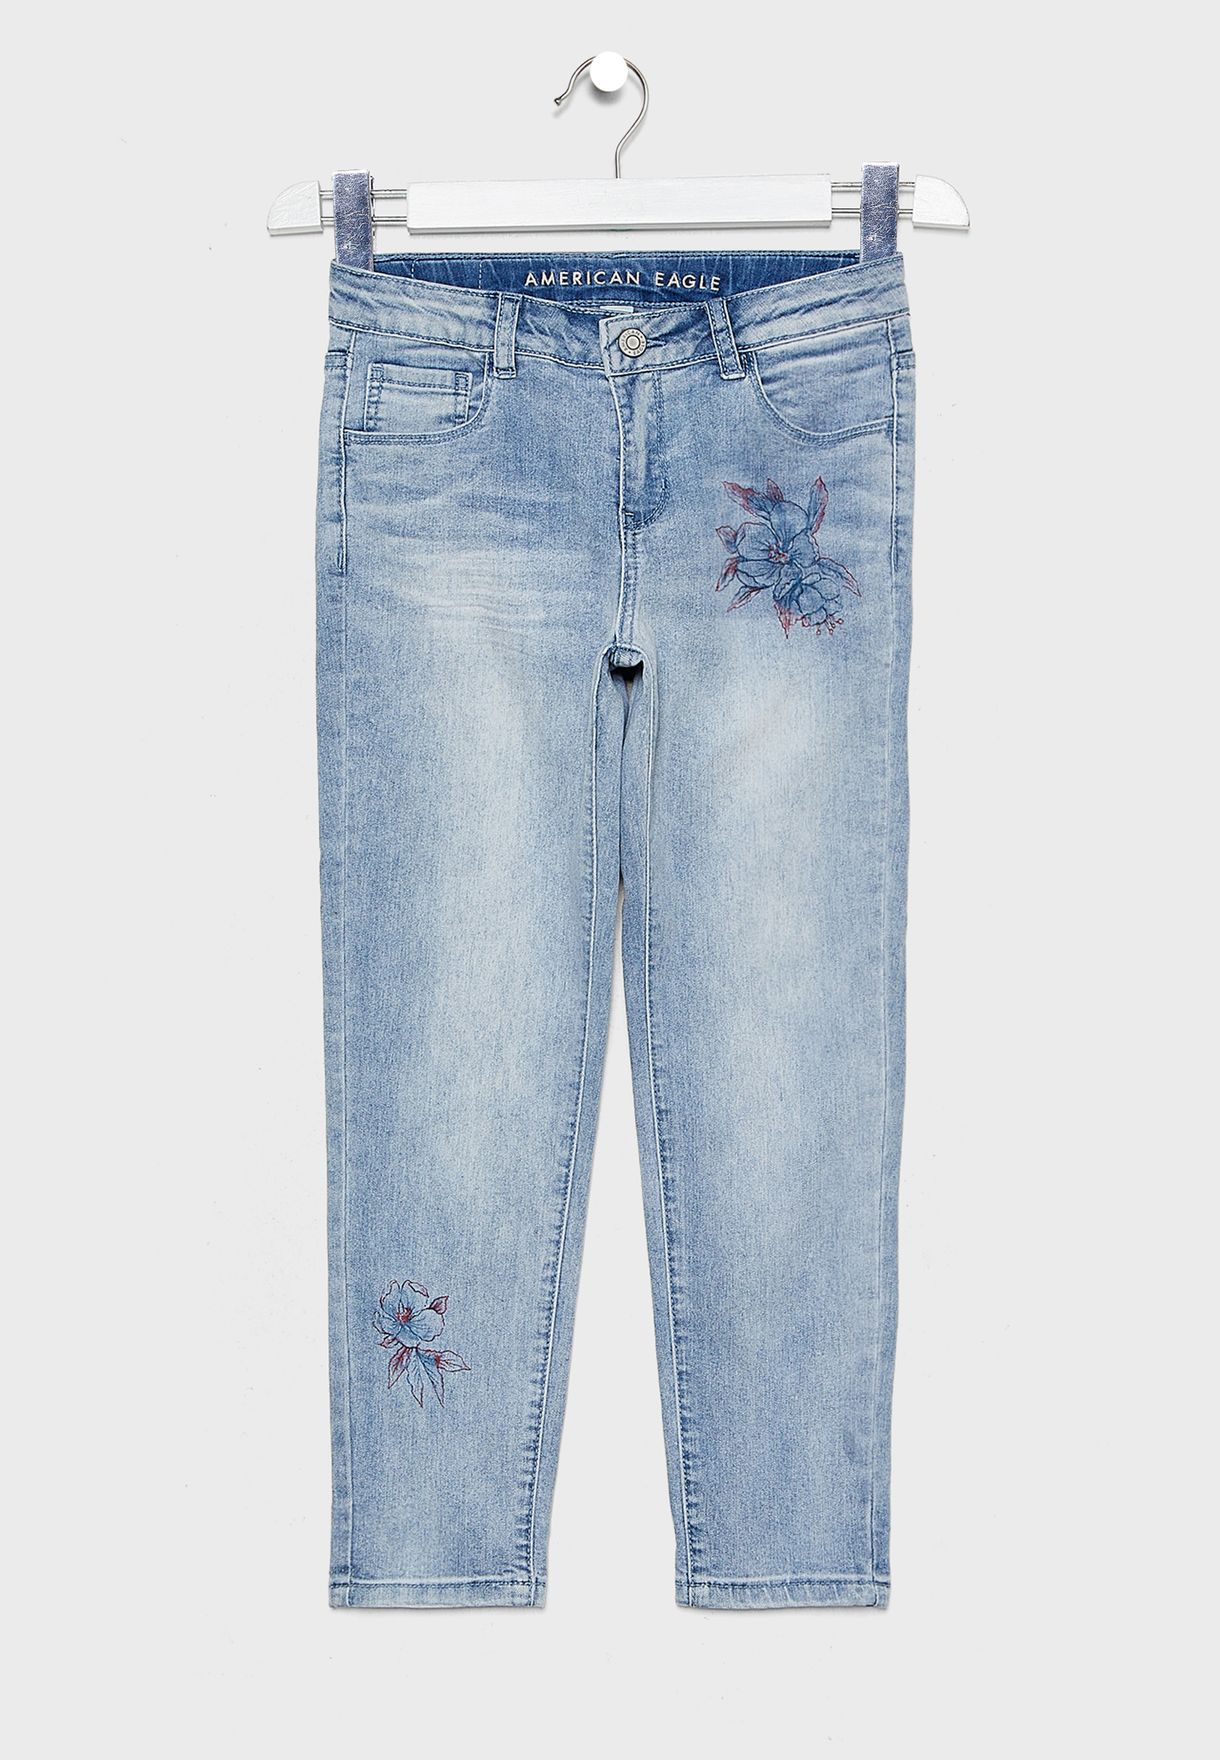 floral embroidered jeans